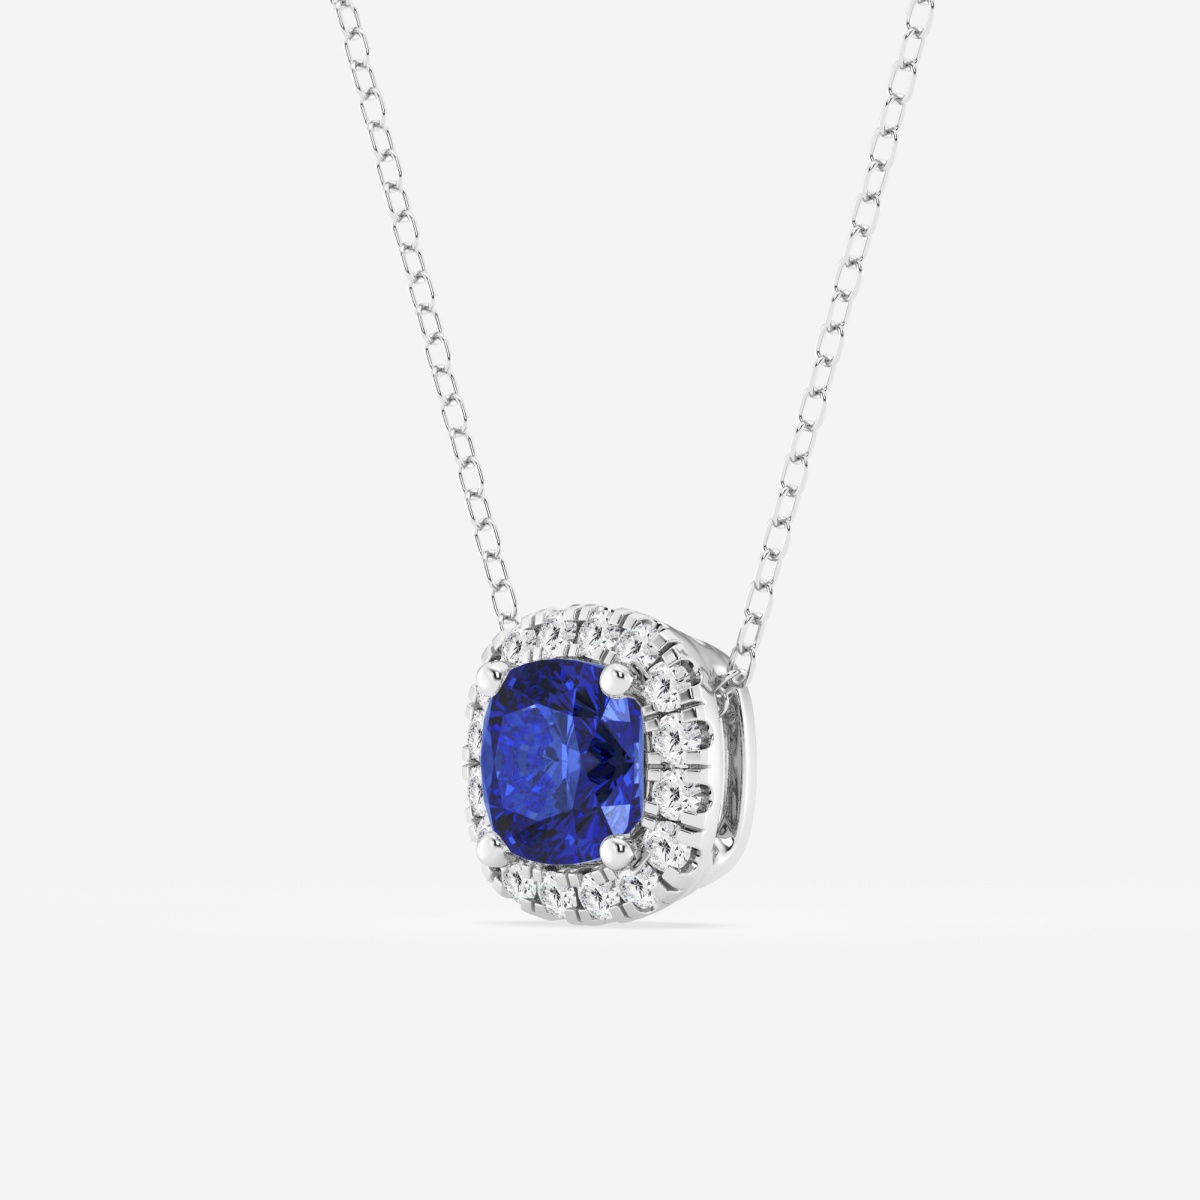 Additional Image 1 for  5.7x5.5 mm Cushion Cut Created Sapphire and 1/5 ctw Round Lab Grown Diamond Halo Pendant with Adjustable Chain